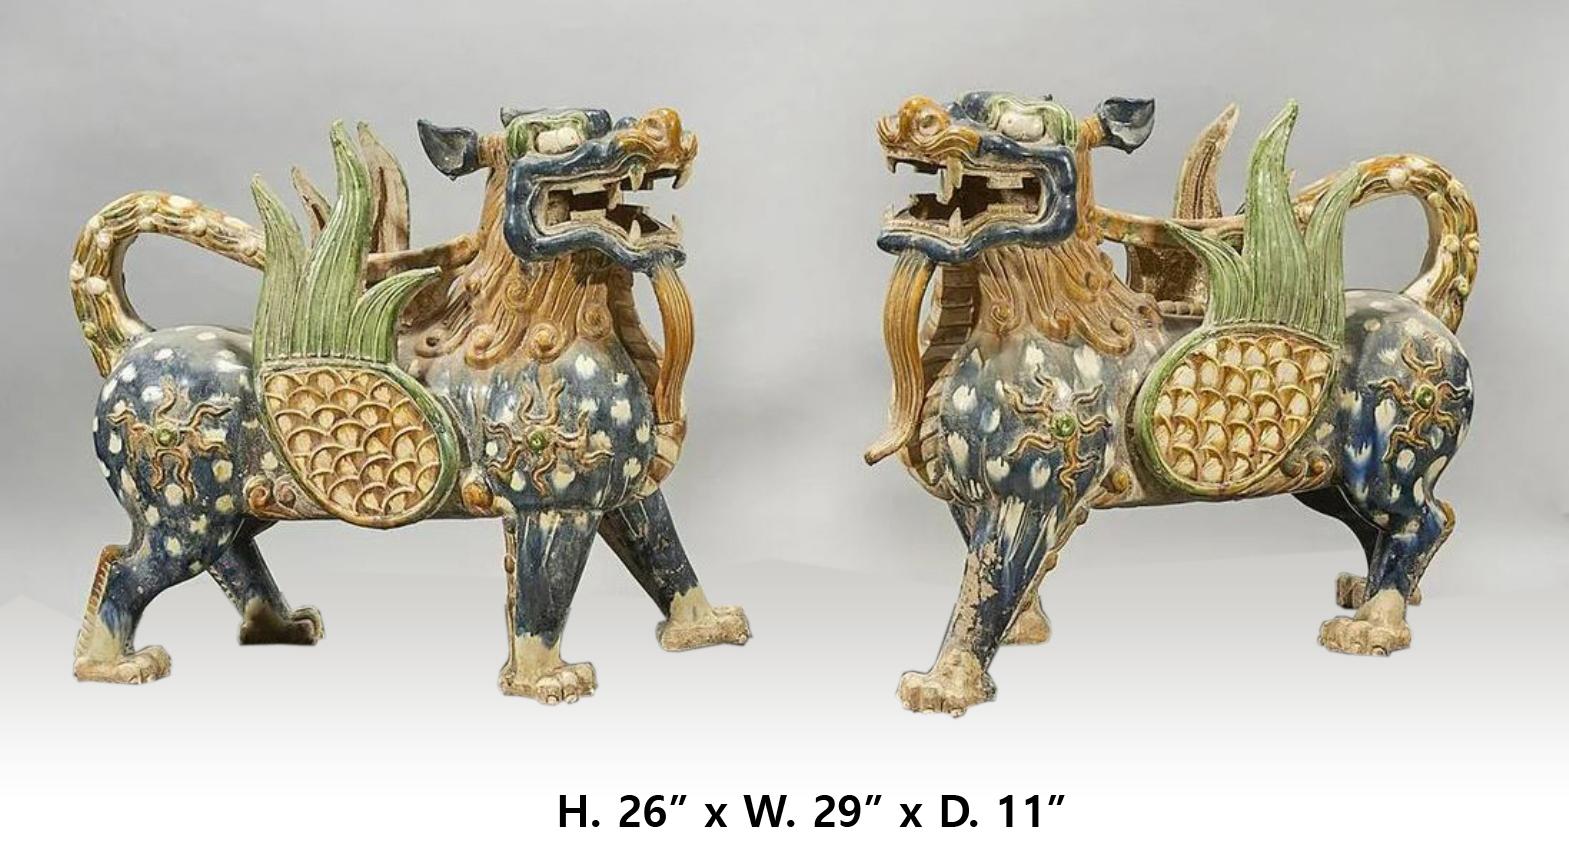 Attractive large Chinese pair of hand painted glazed pottery winged Fu-dogs in walking position. 
The Fu-dogs can be used indoors or outdoors, they are beautifully proportioned. 20th century
Measures: H. 26